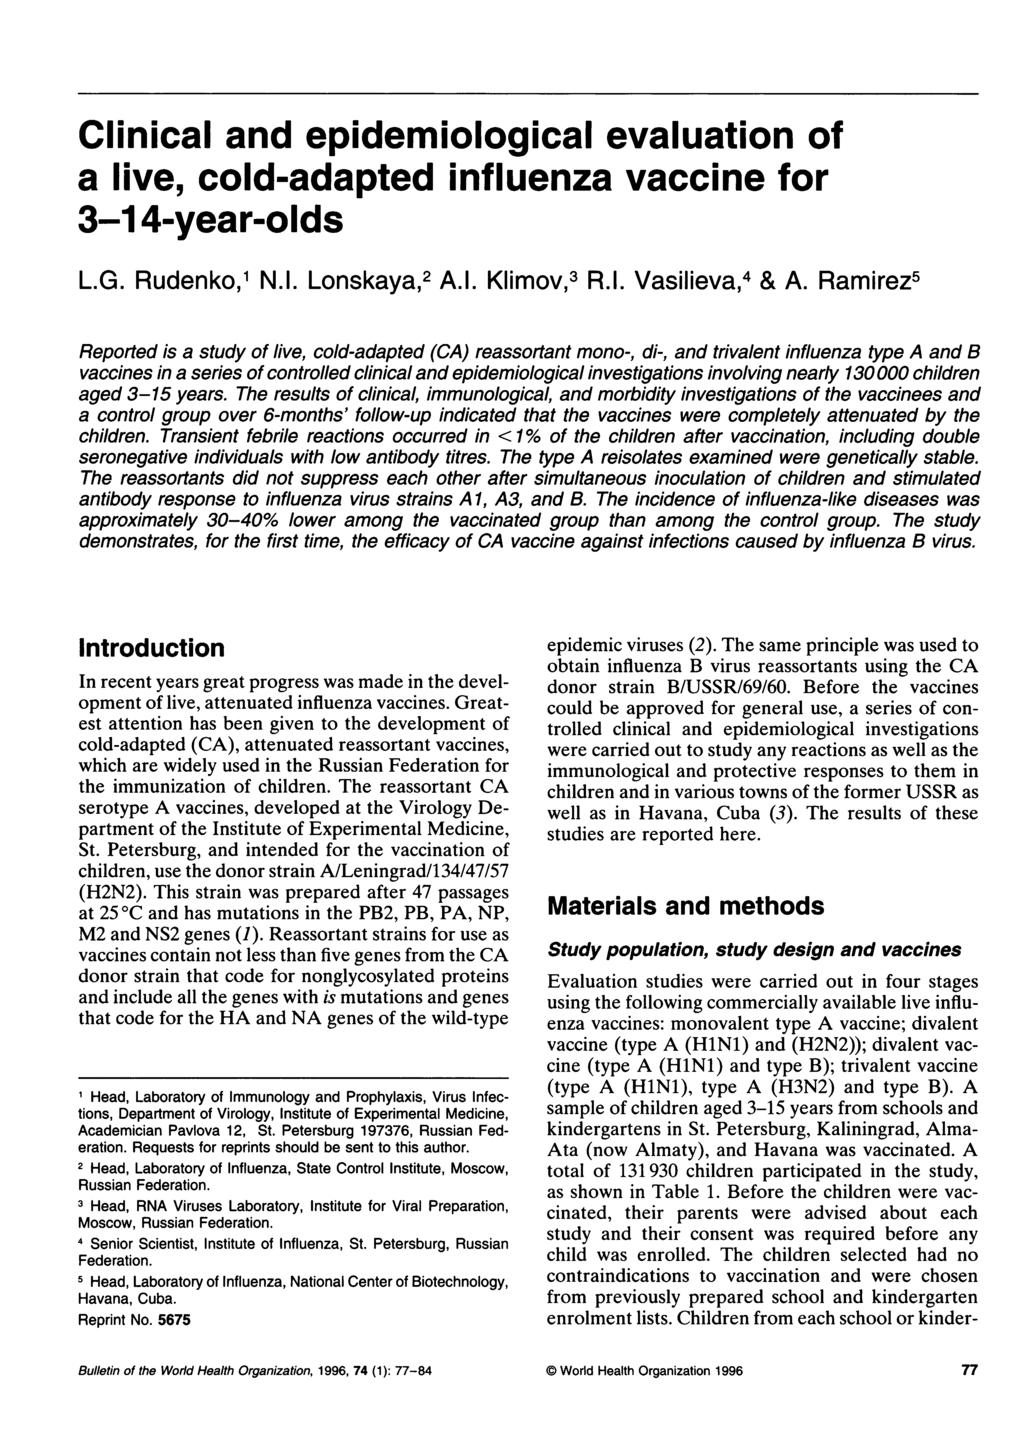 Clinicl nd epidemiologicl evlution of live, cold-dpted influenz vccine for 3-1 4-yer-olds L.G. Rudenko,1 N.I. Lonsky,2 A.I. Klimov,3 R.I. Vsiliev,4 & A.